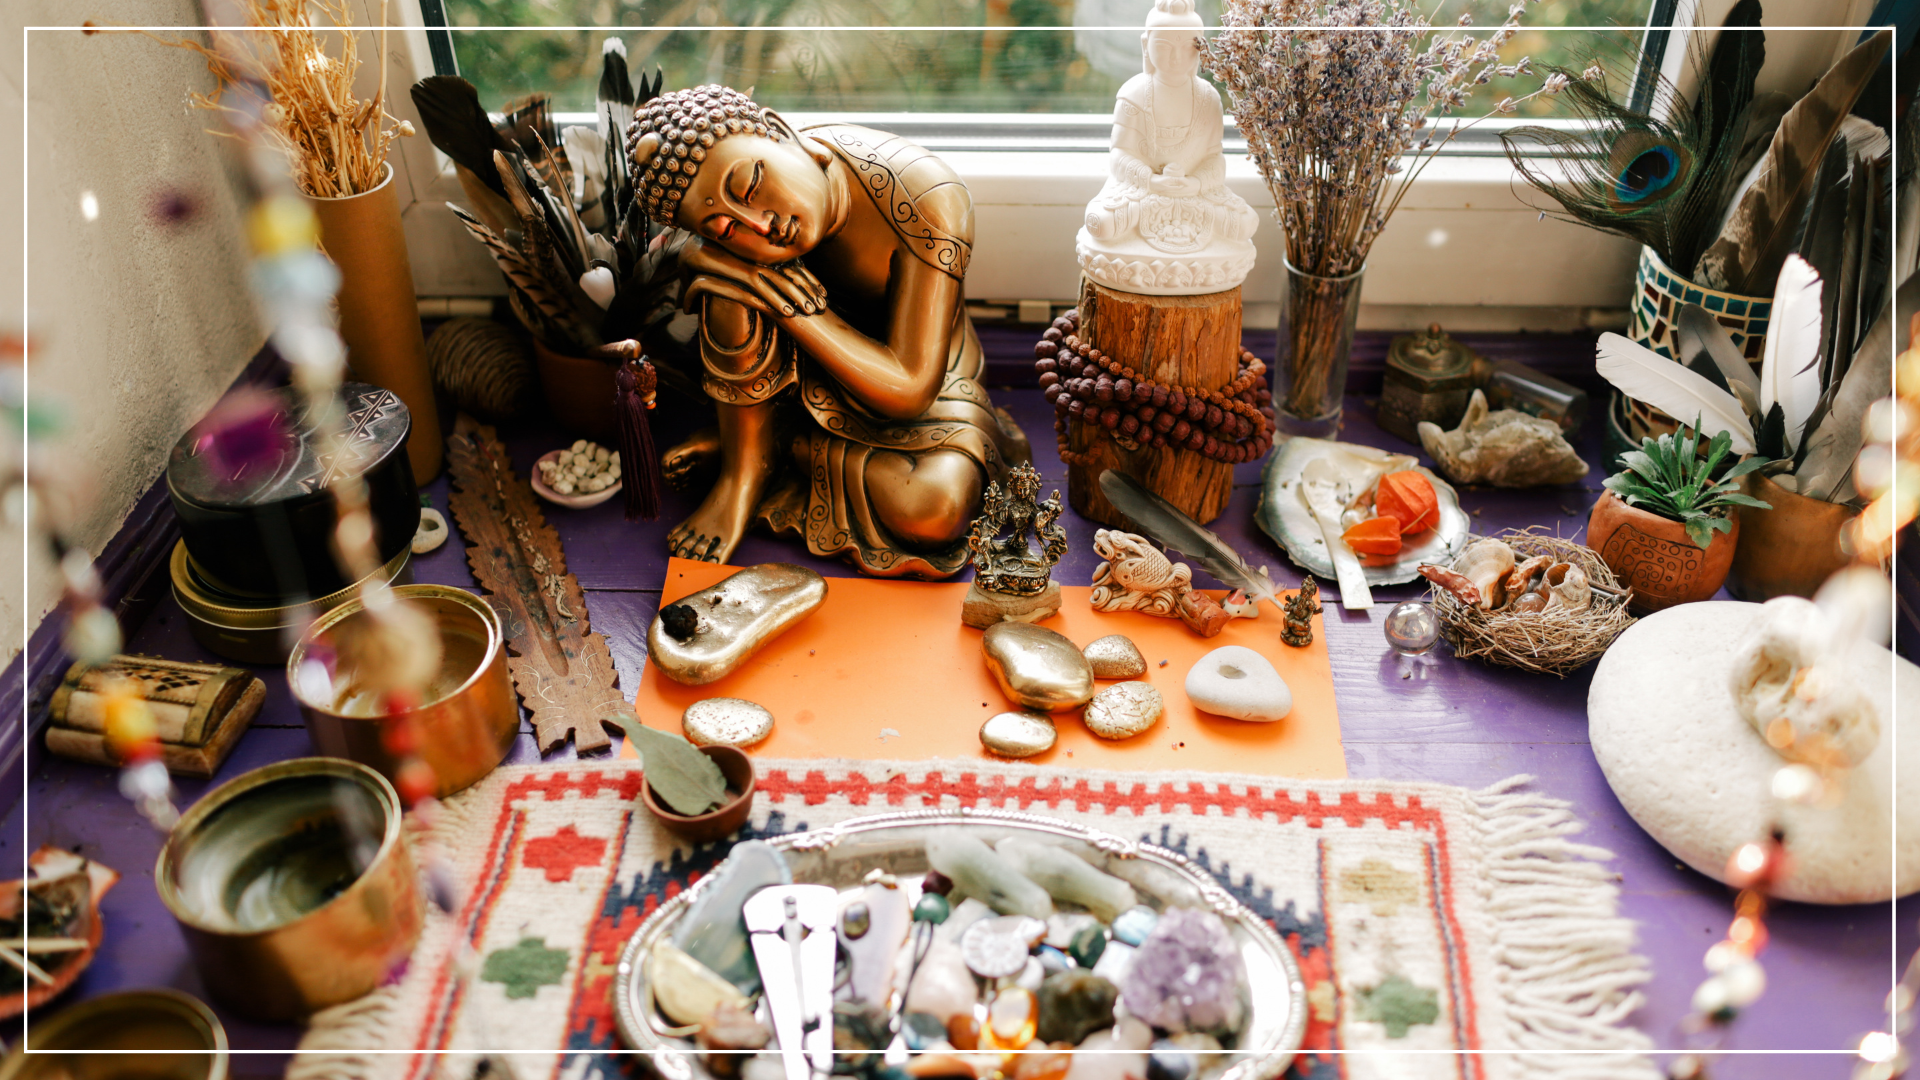 How to Build an Ancestor Altar, Give Offerings, Prayers and Burn